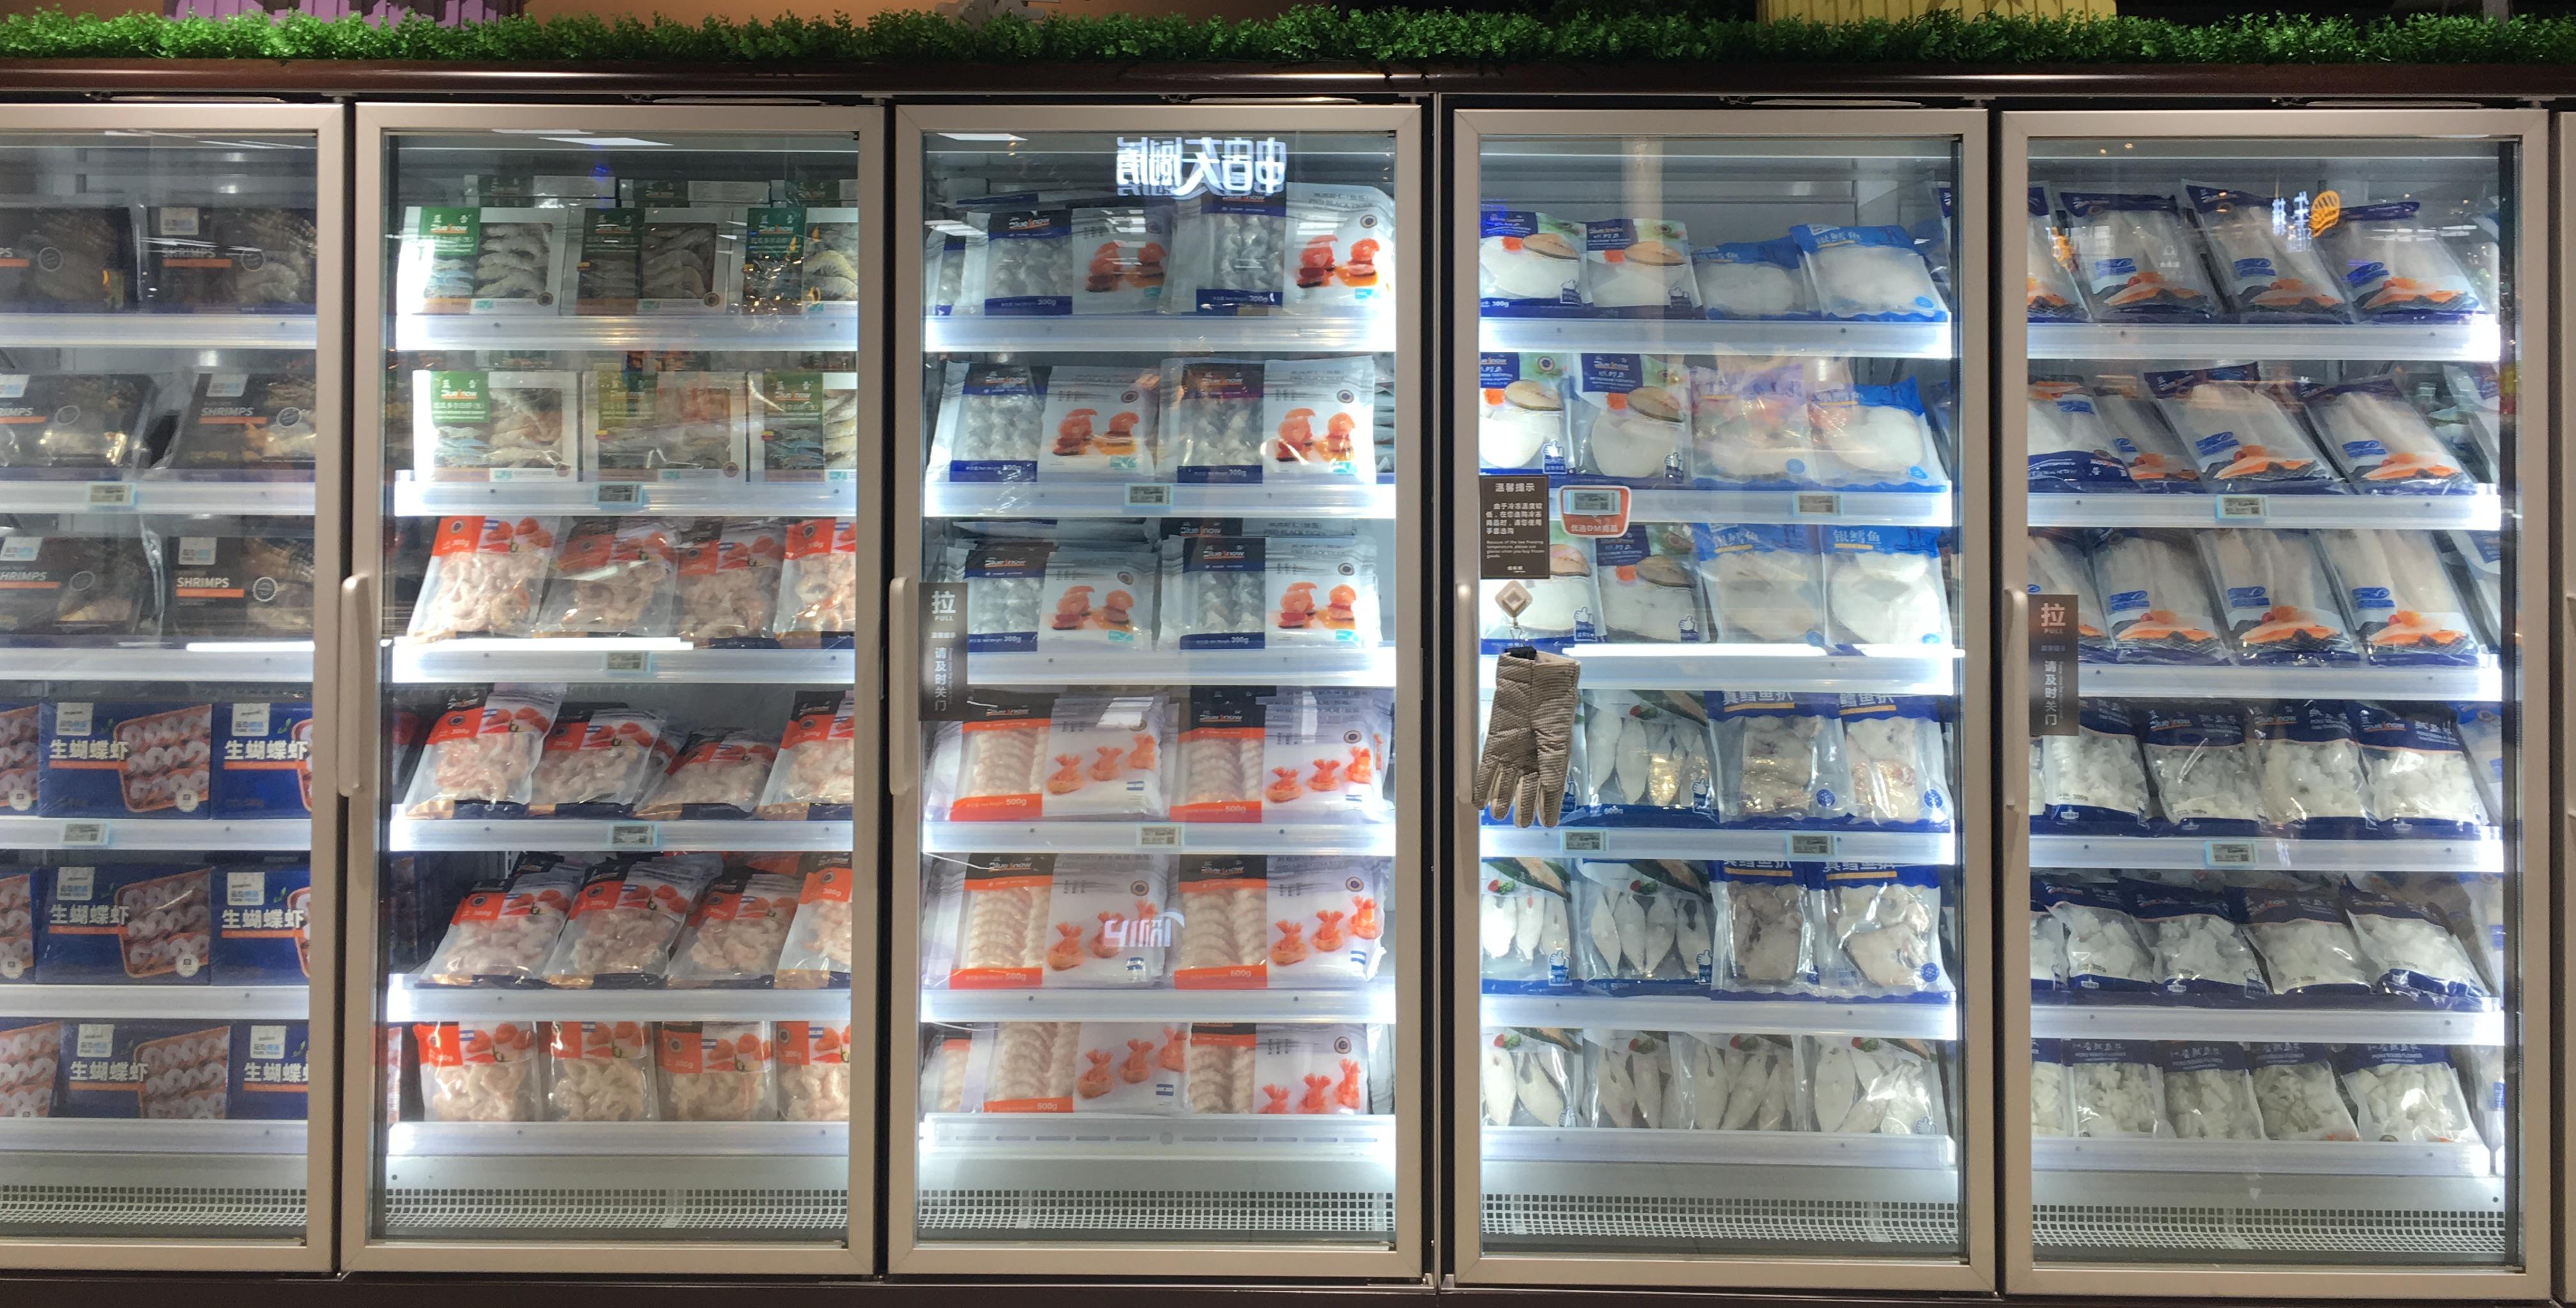 Best quality Heated tempered Glass Door for Supermarket Display Cold Room